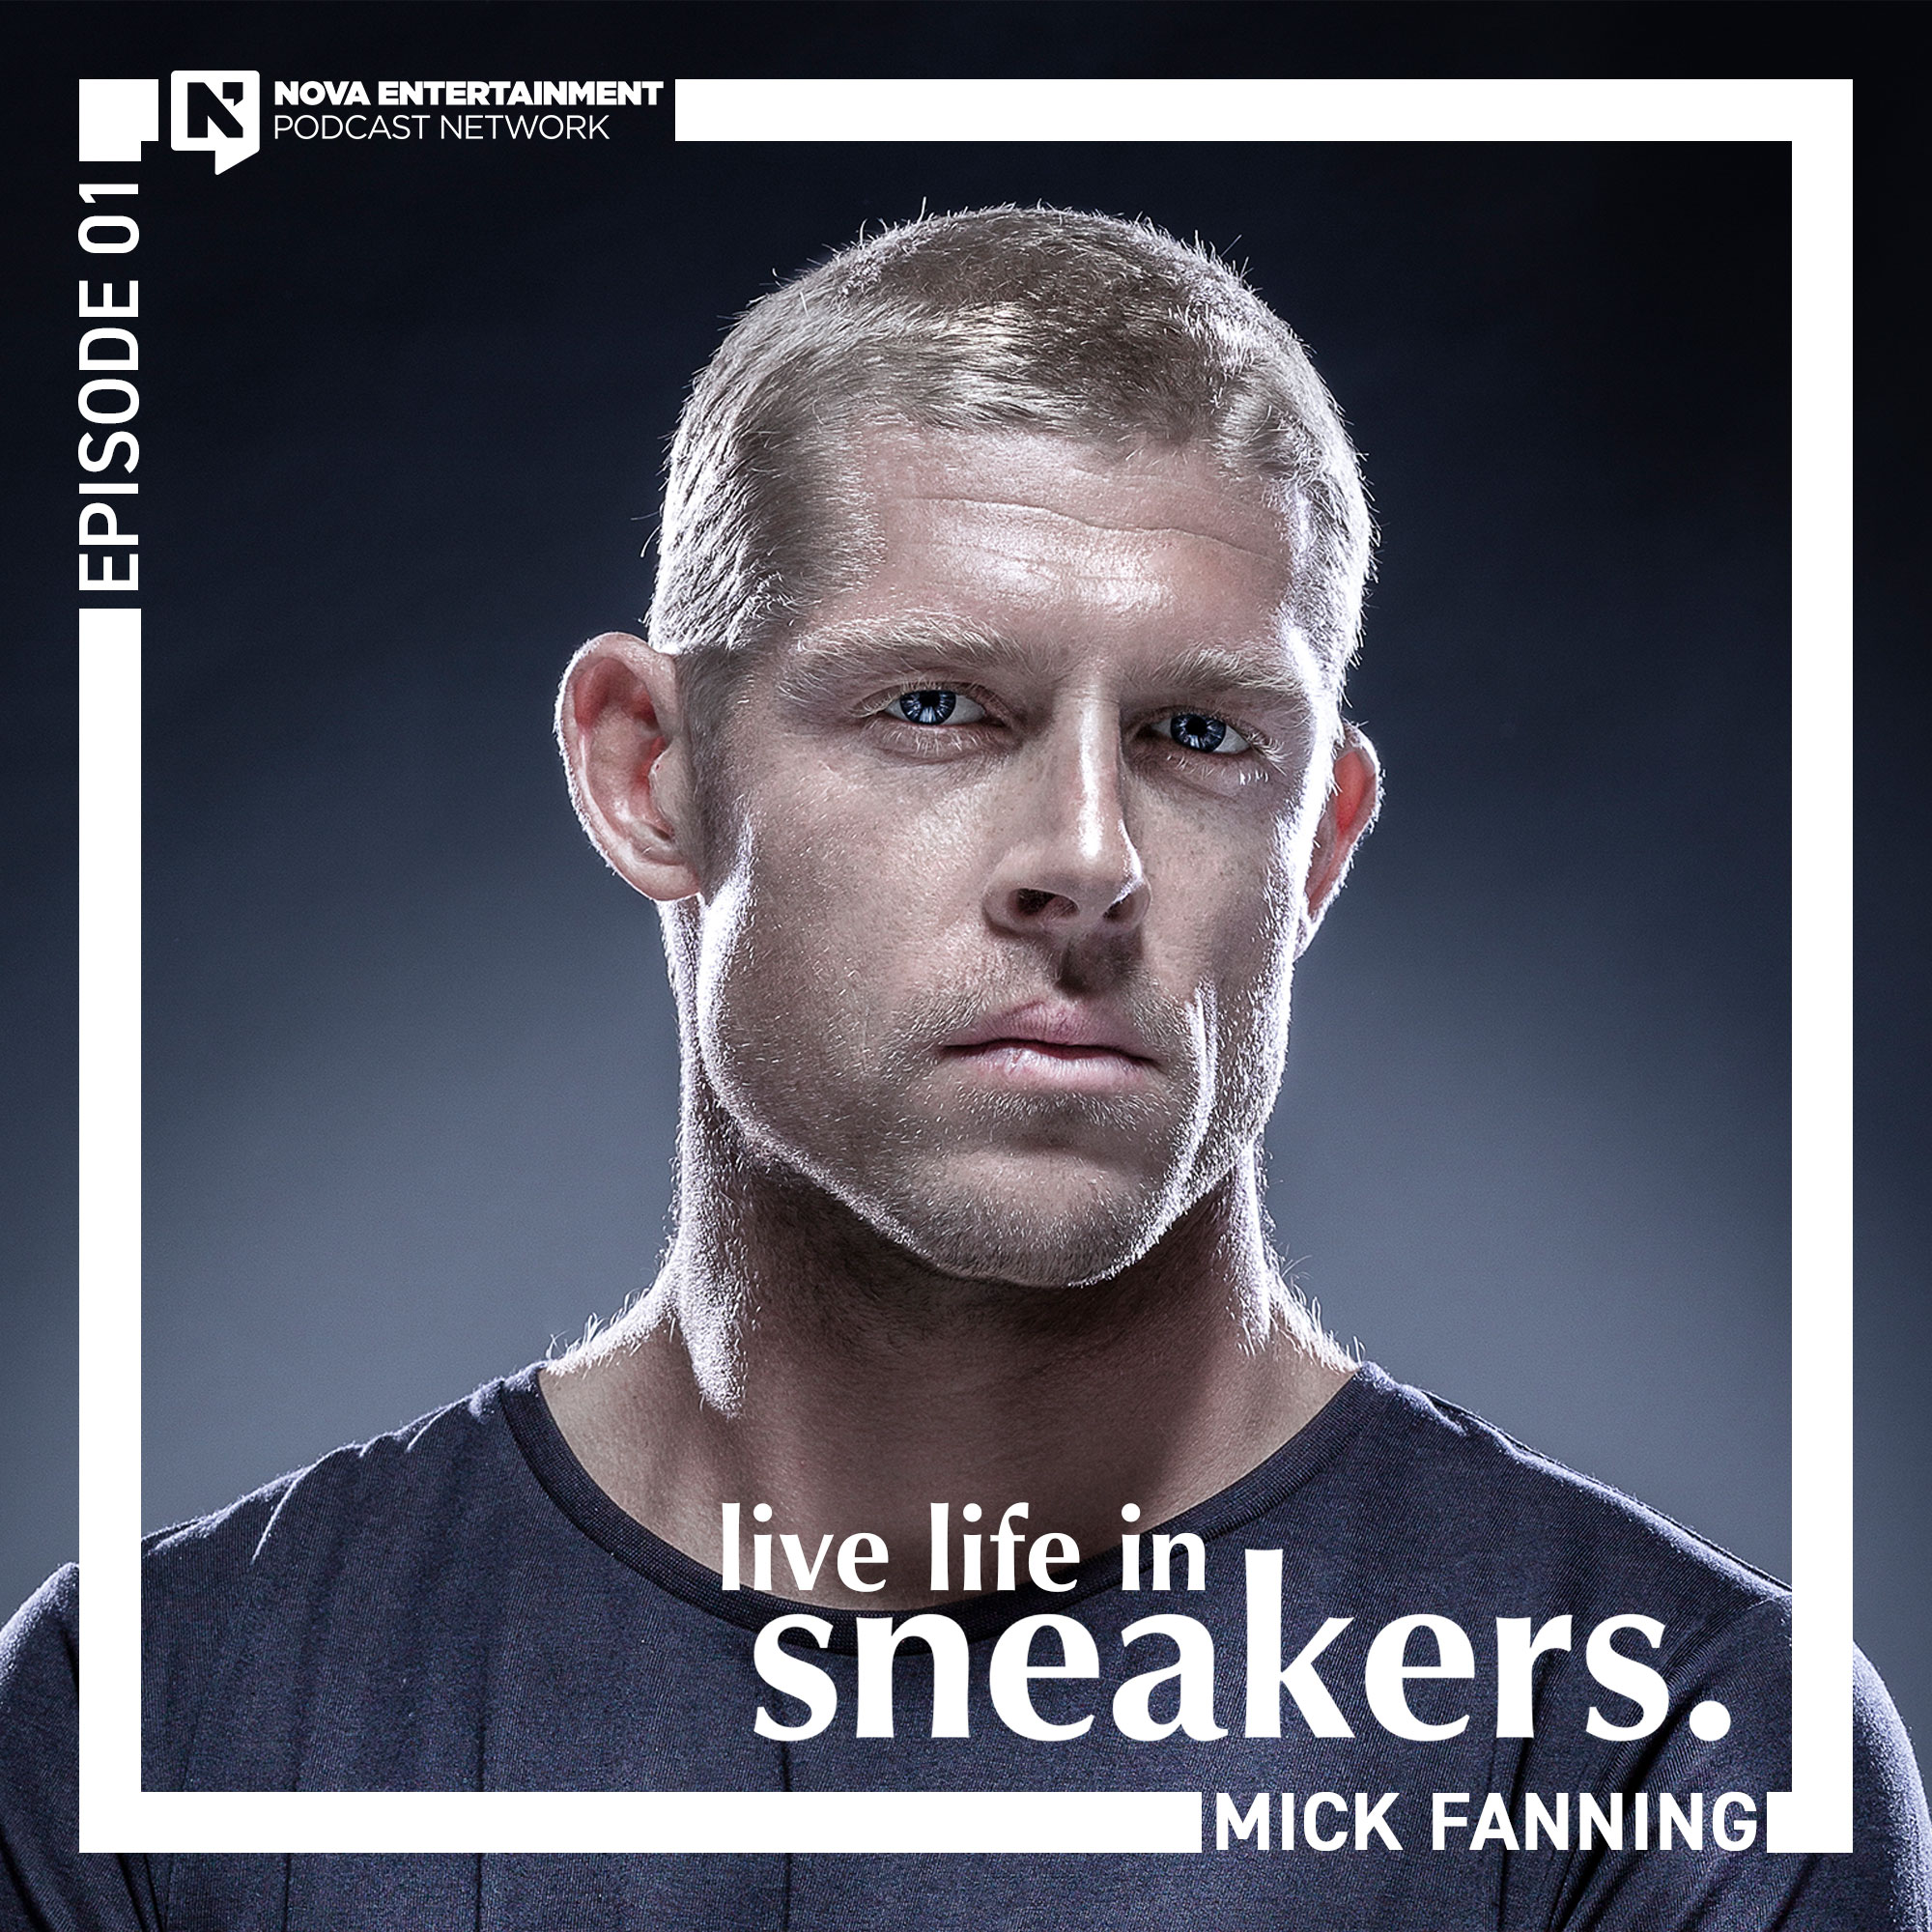 Mick Fanning on fatherhood, humility and shark preservation